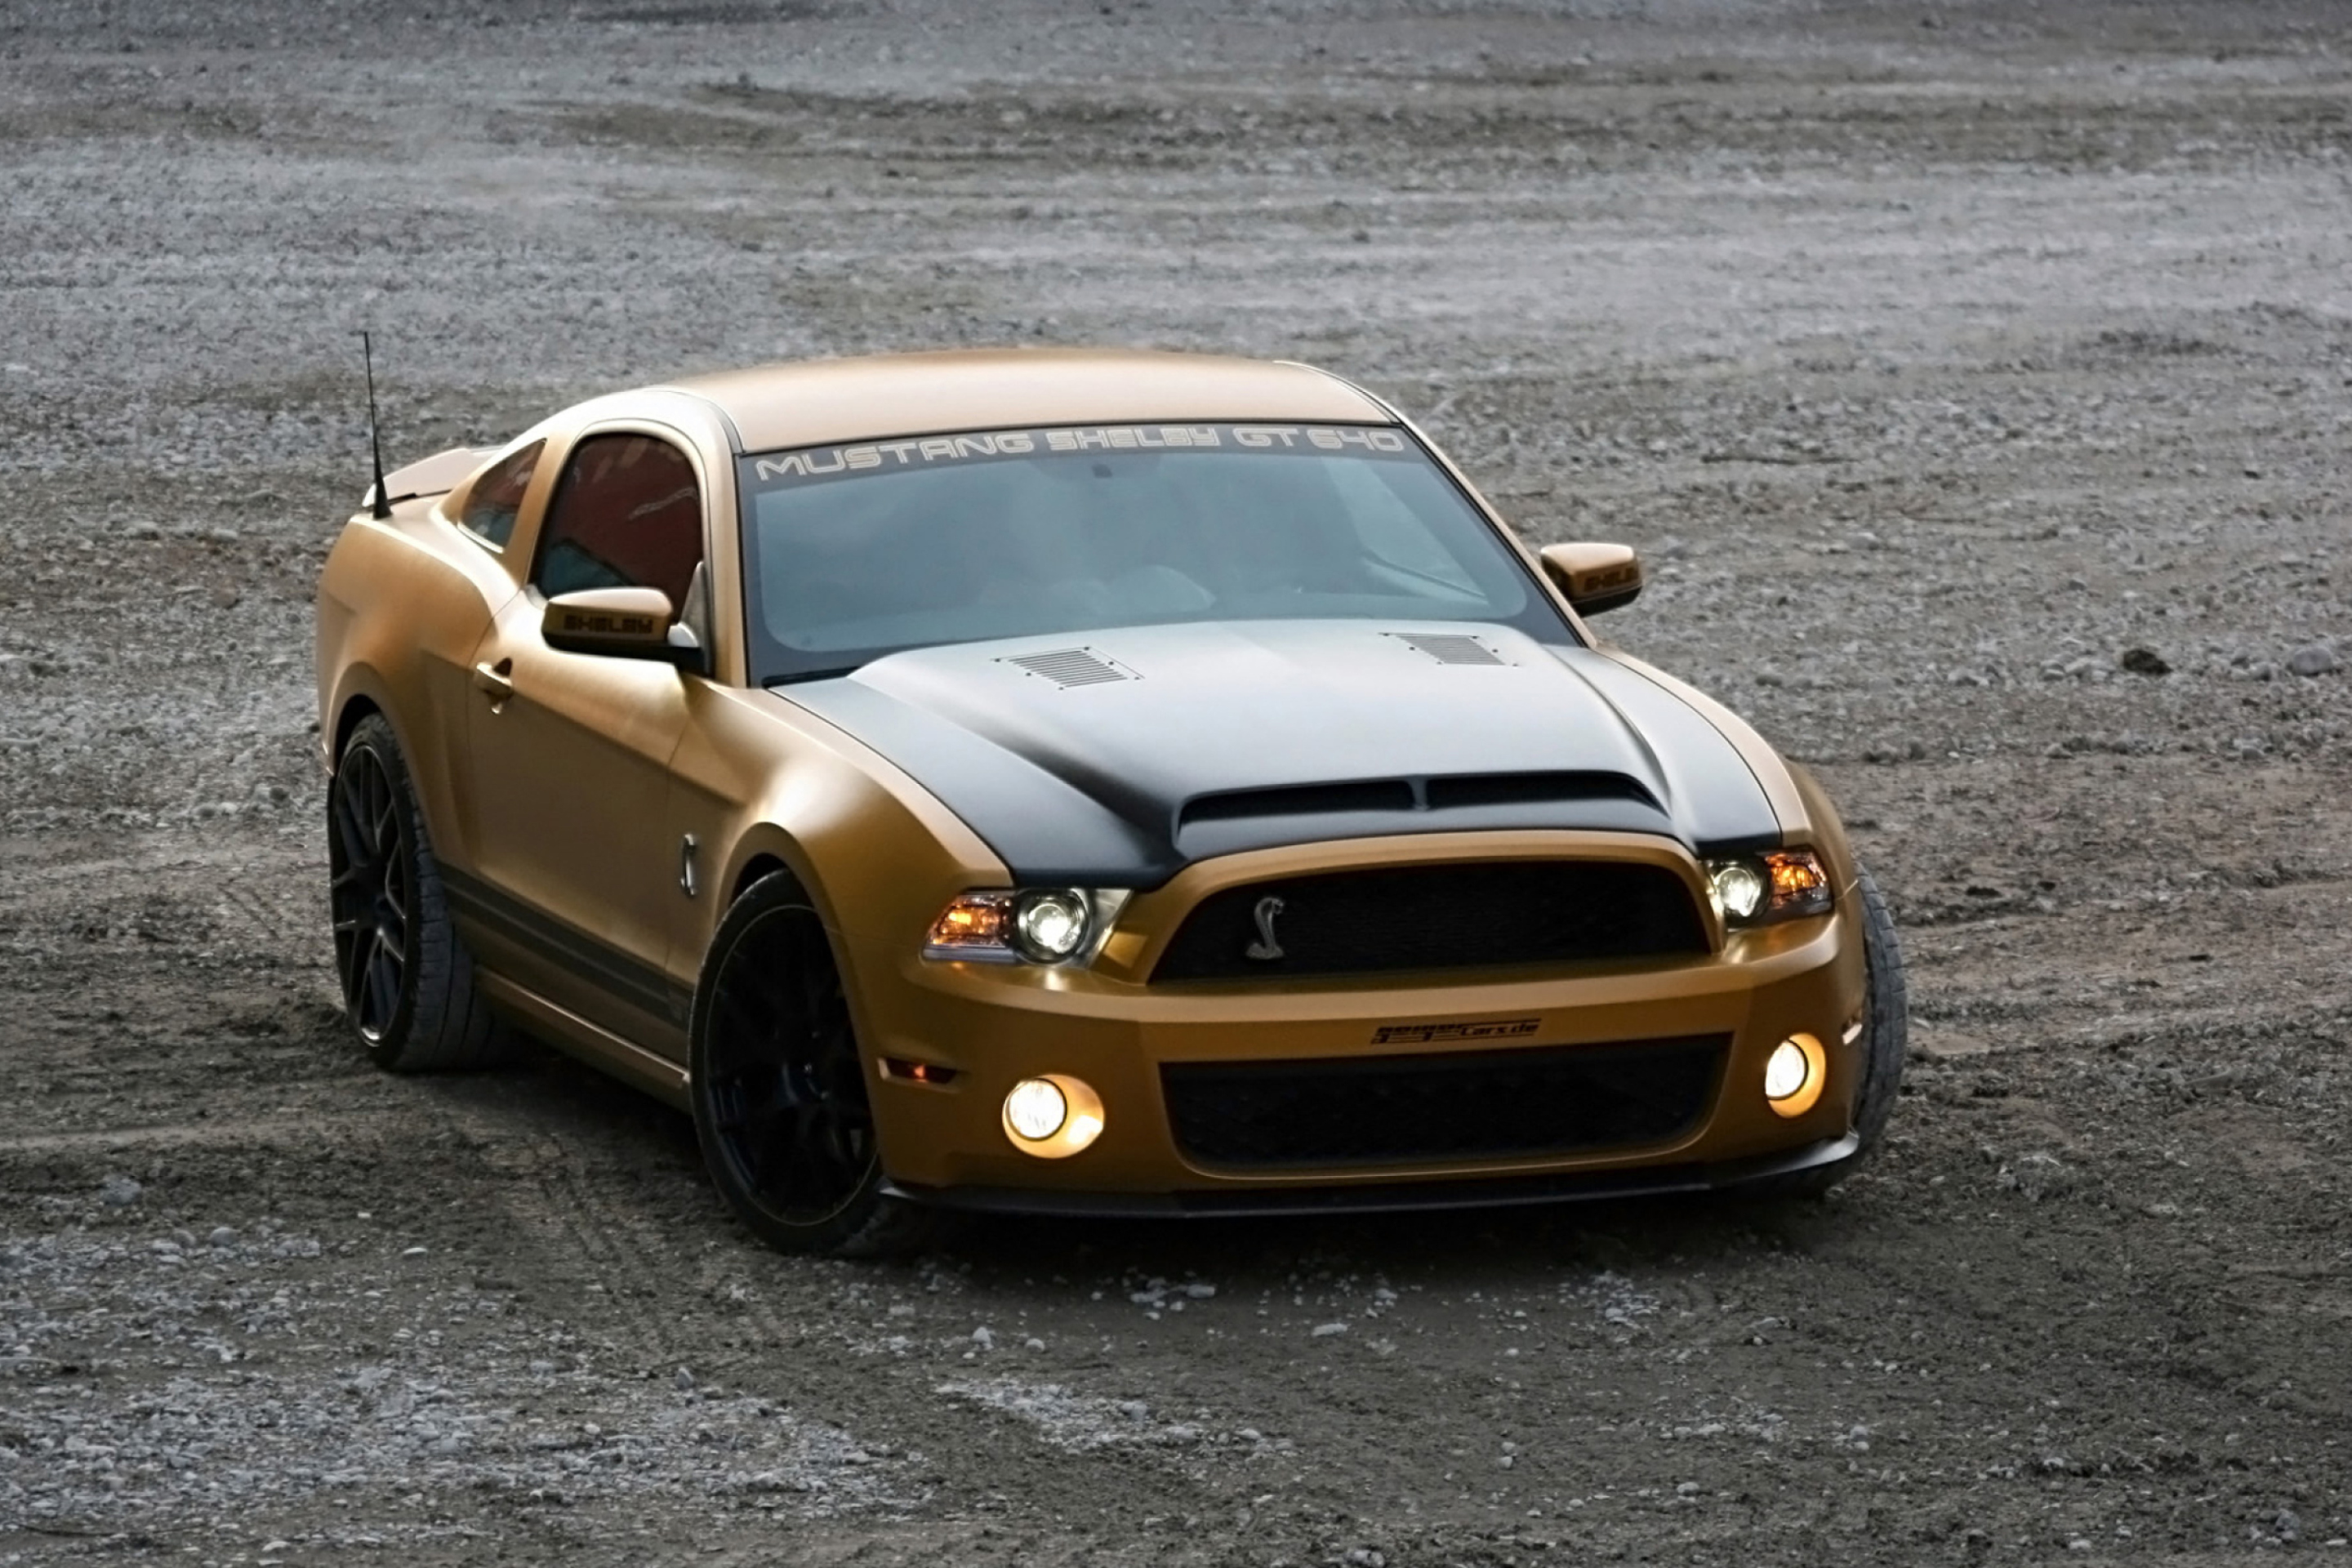 Ford Mustang Shelby GT640 wallpaper 2880x1920